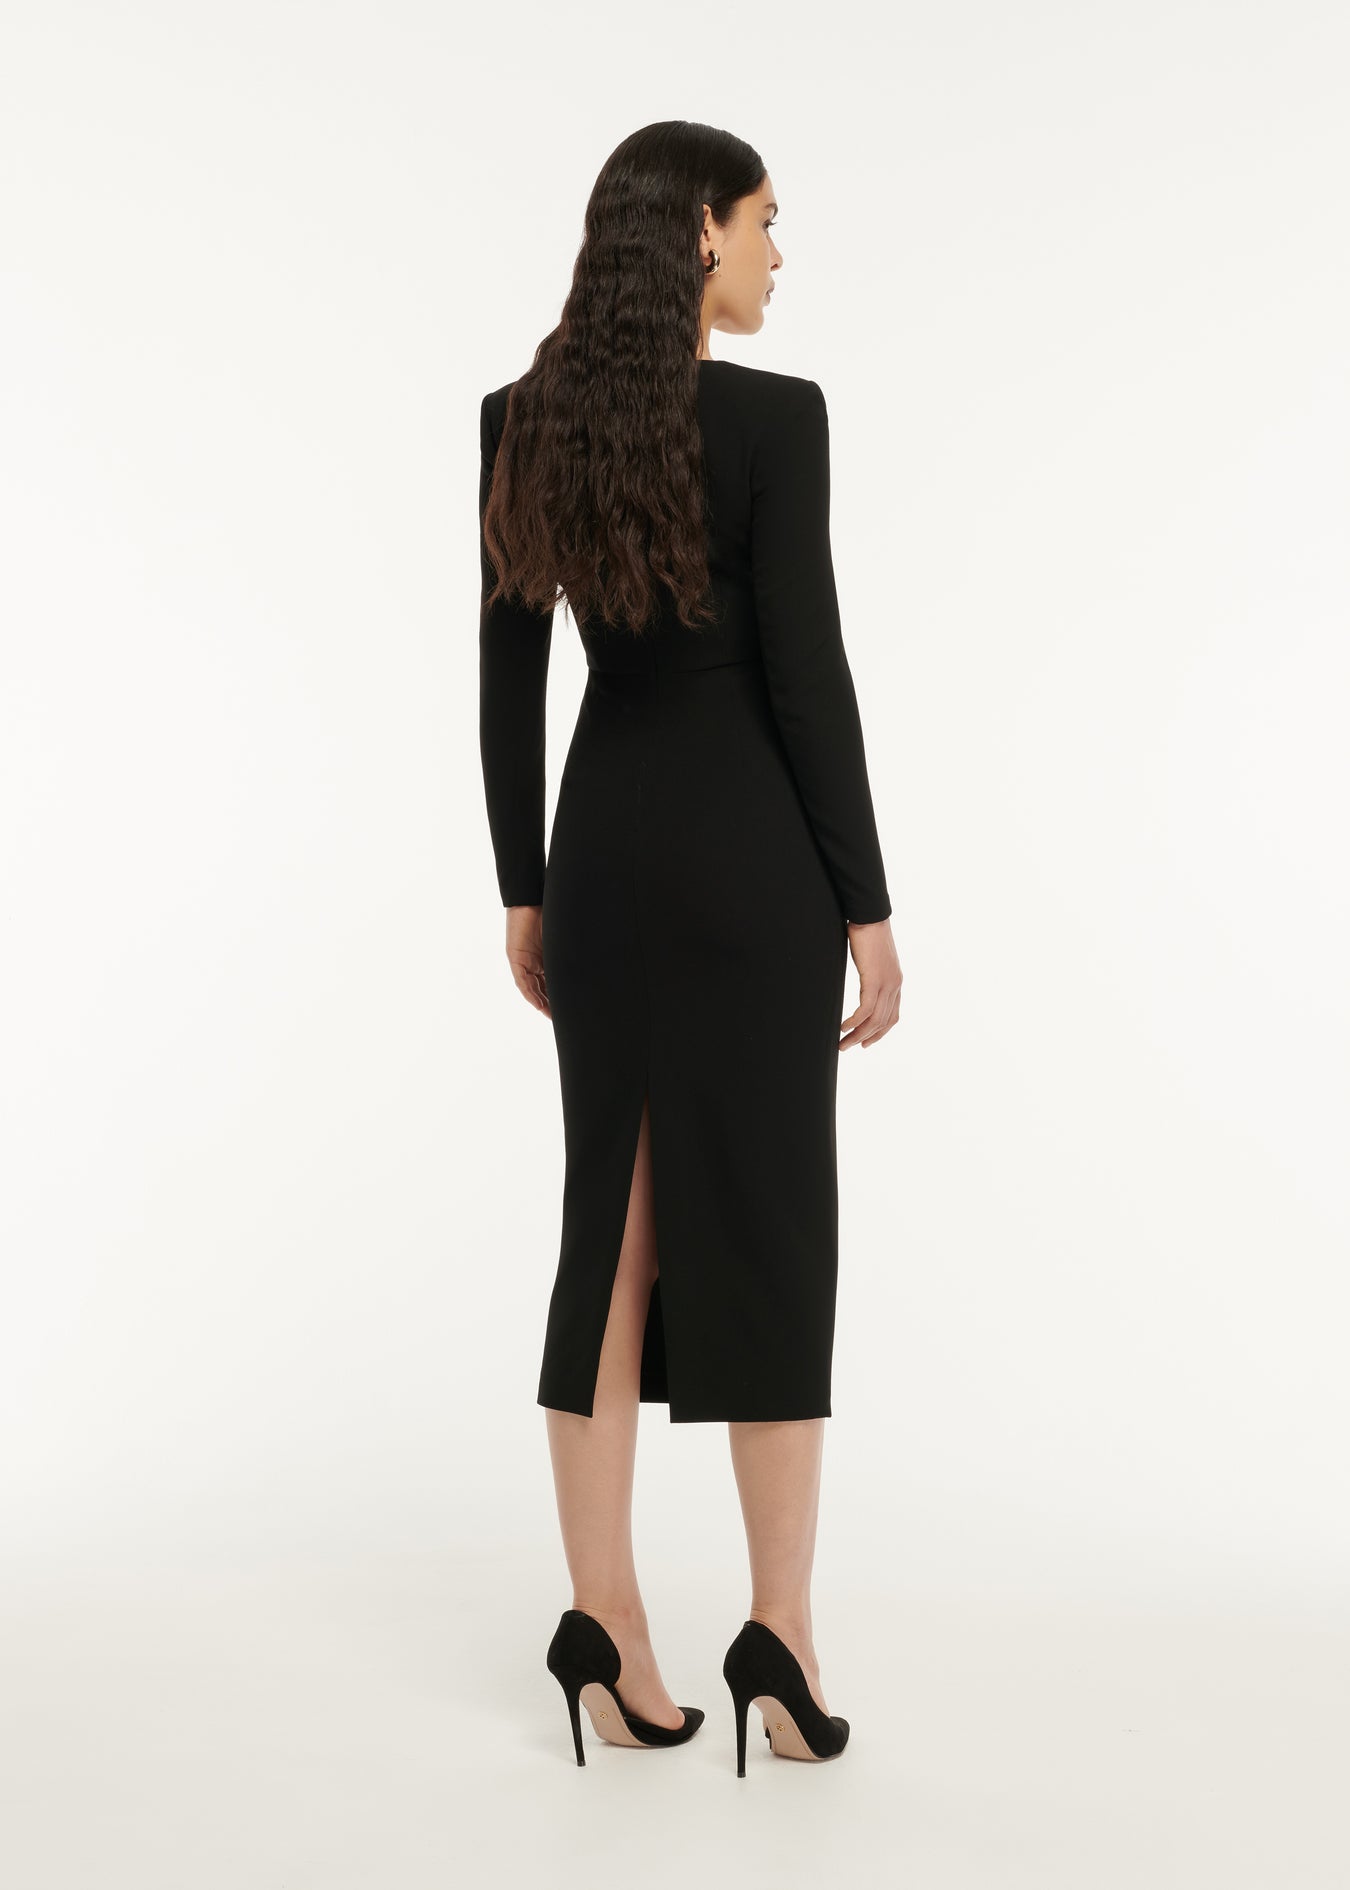 The back of a woman wearing the Long Sleeve Curved Stretch Cady Midi Dress